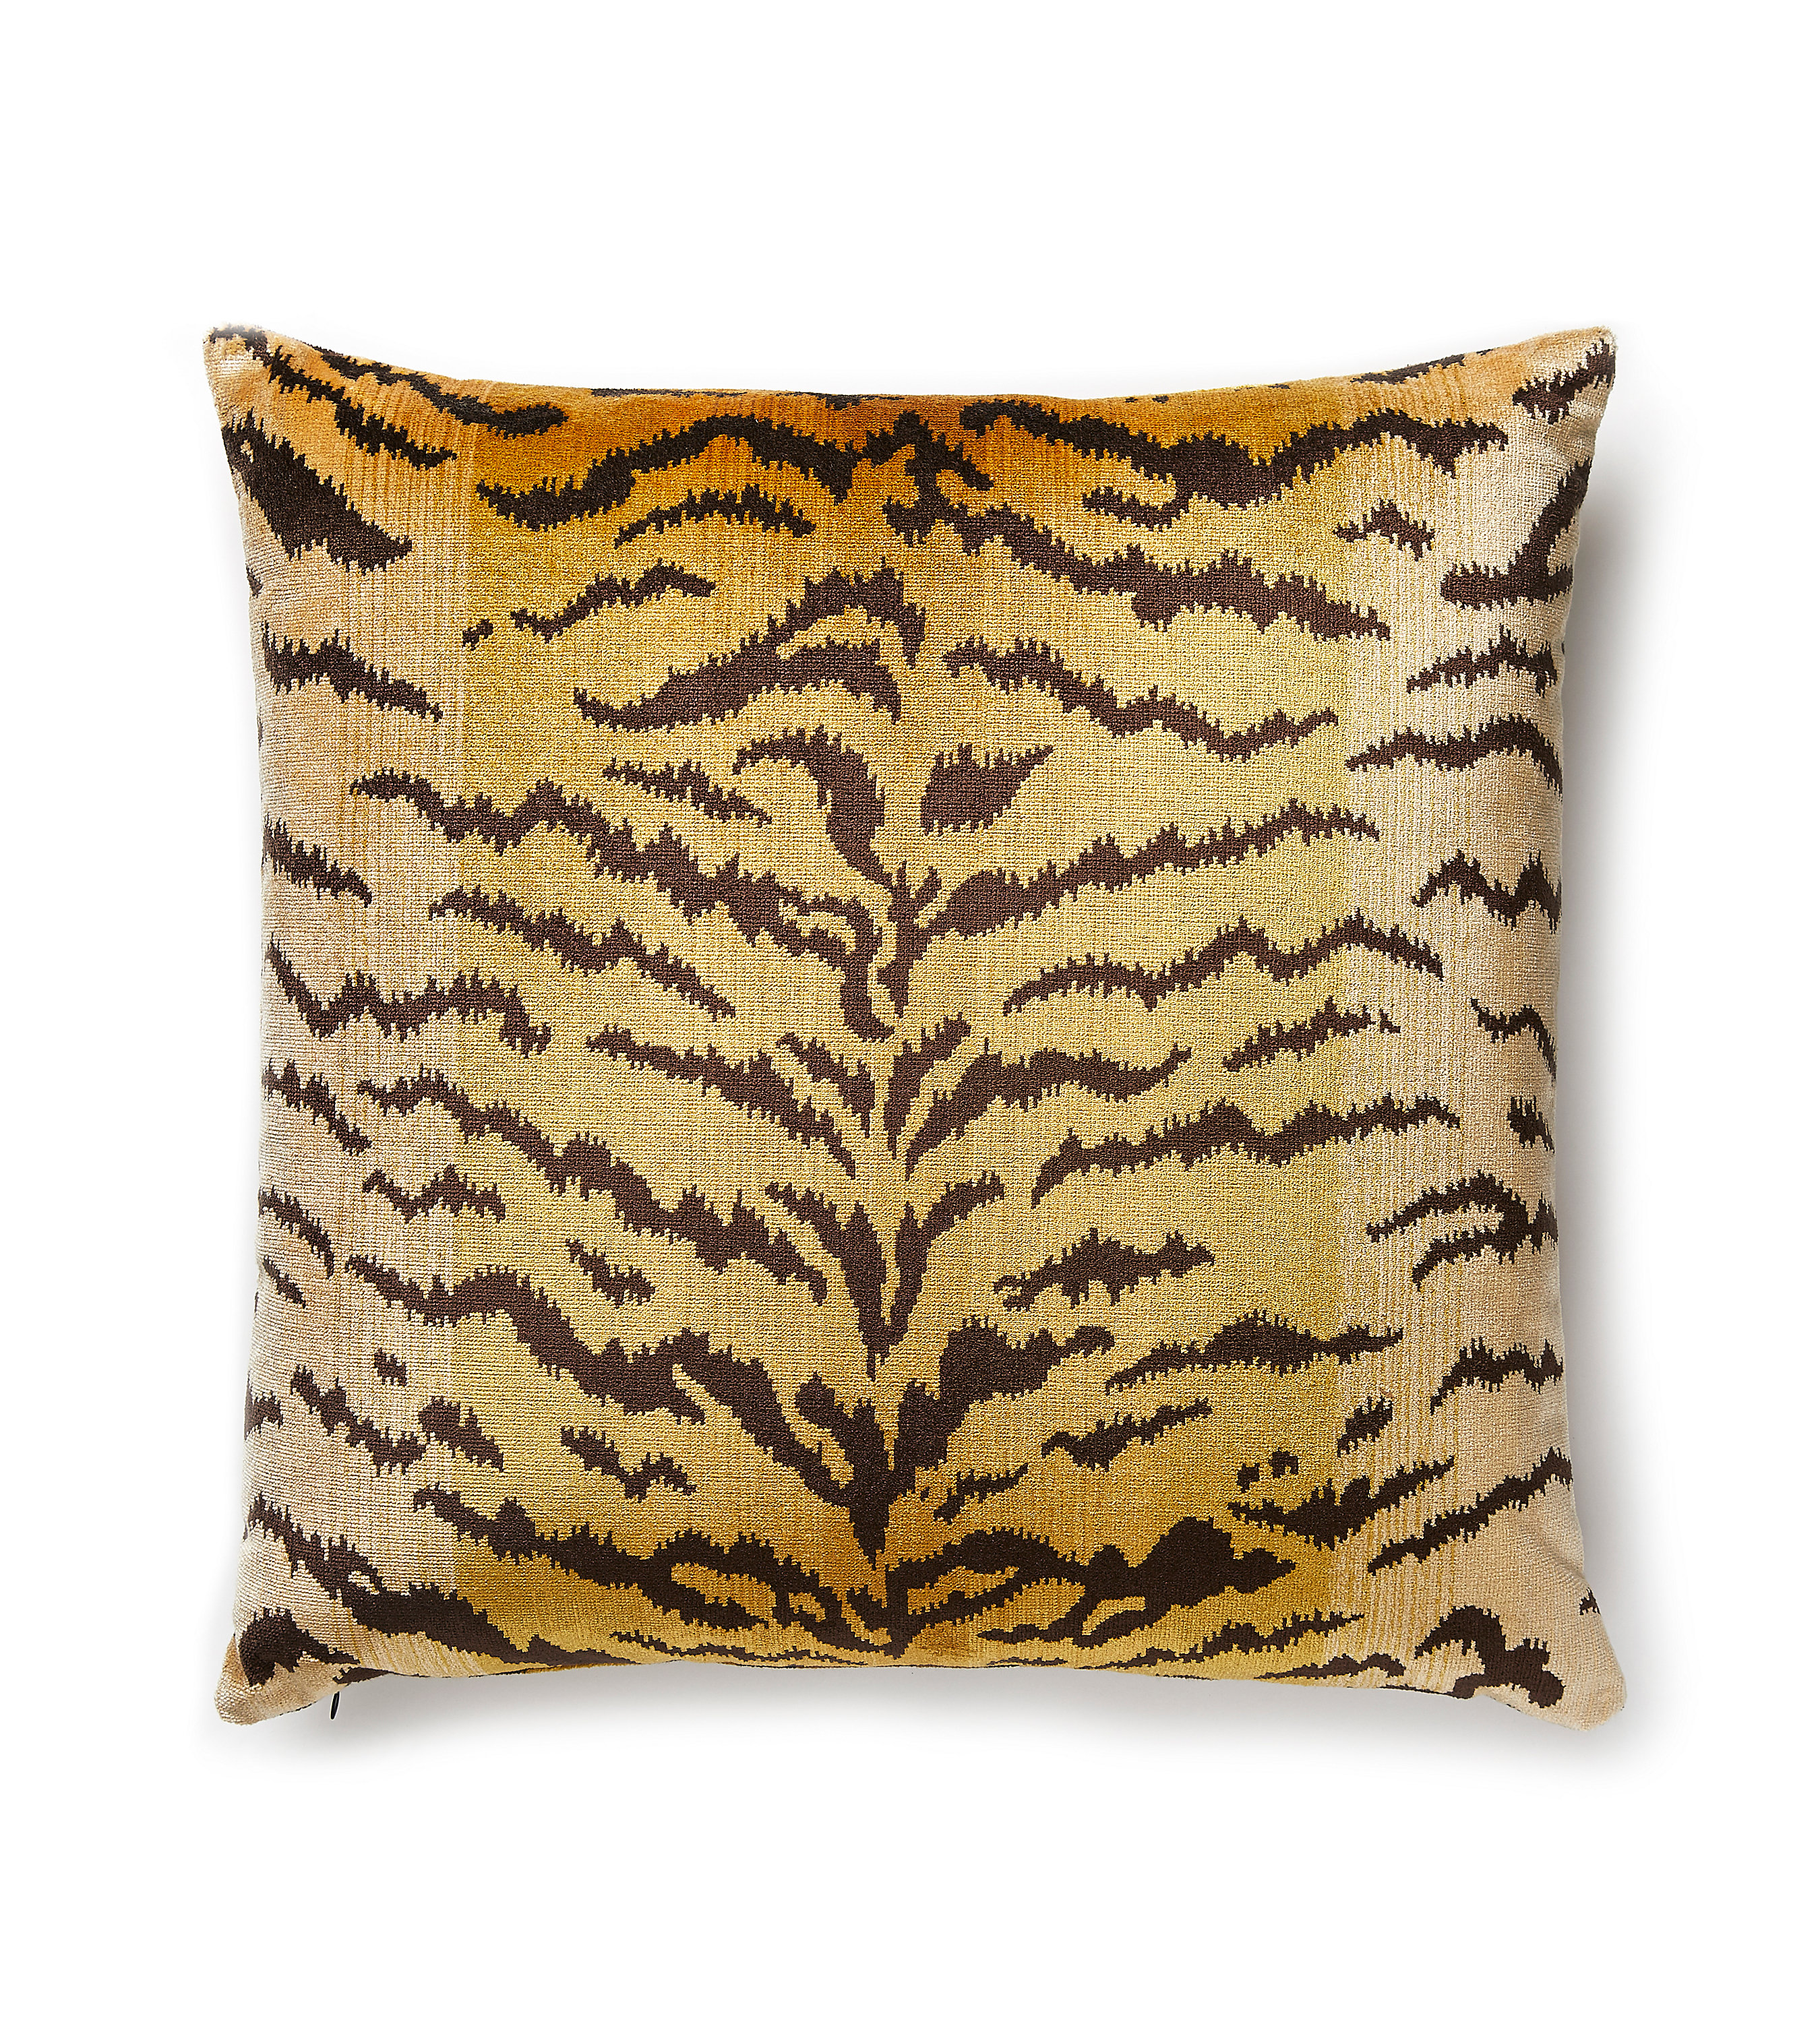 Various Linen Tiger Cushion Pillow Covers FREE Ship USA The Great Cat